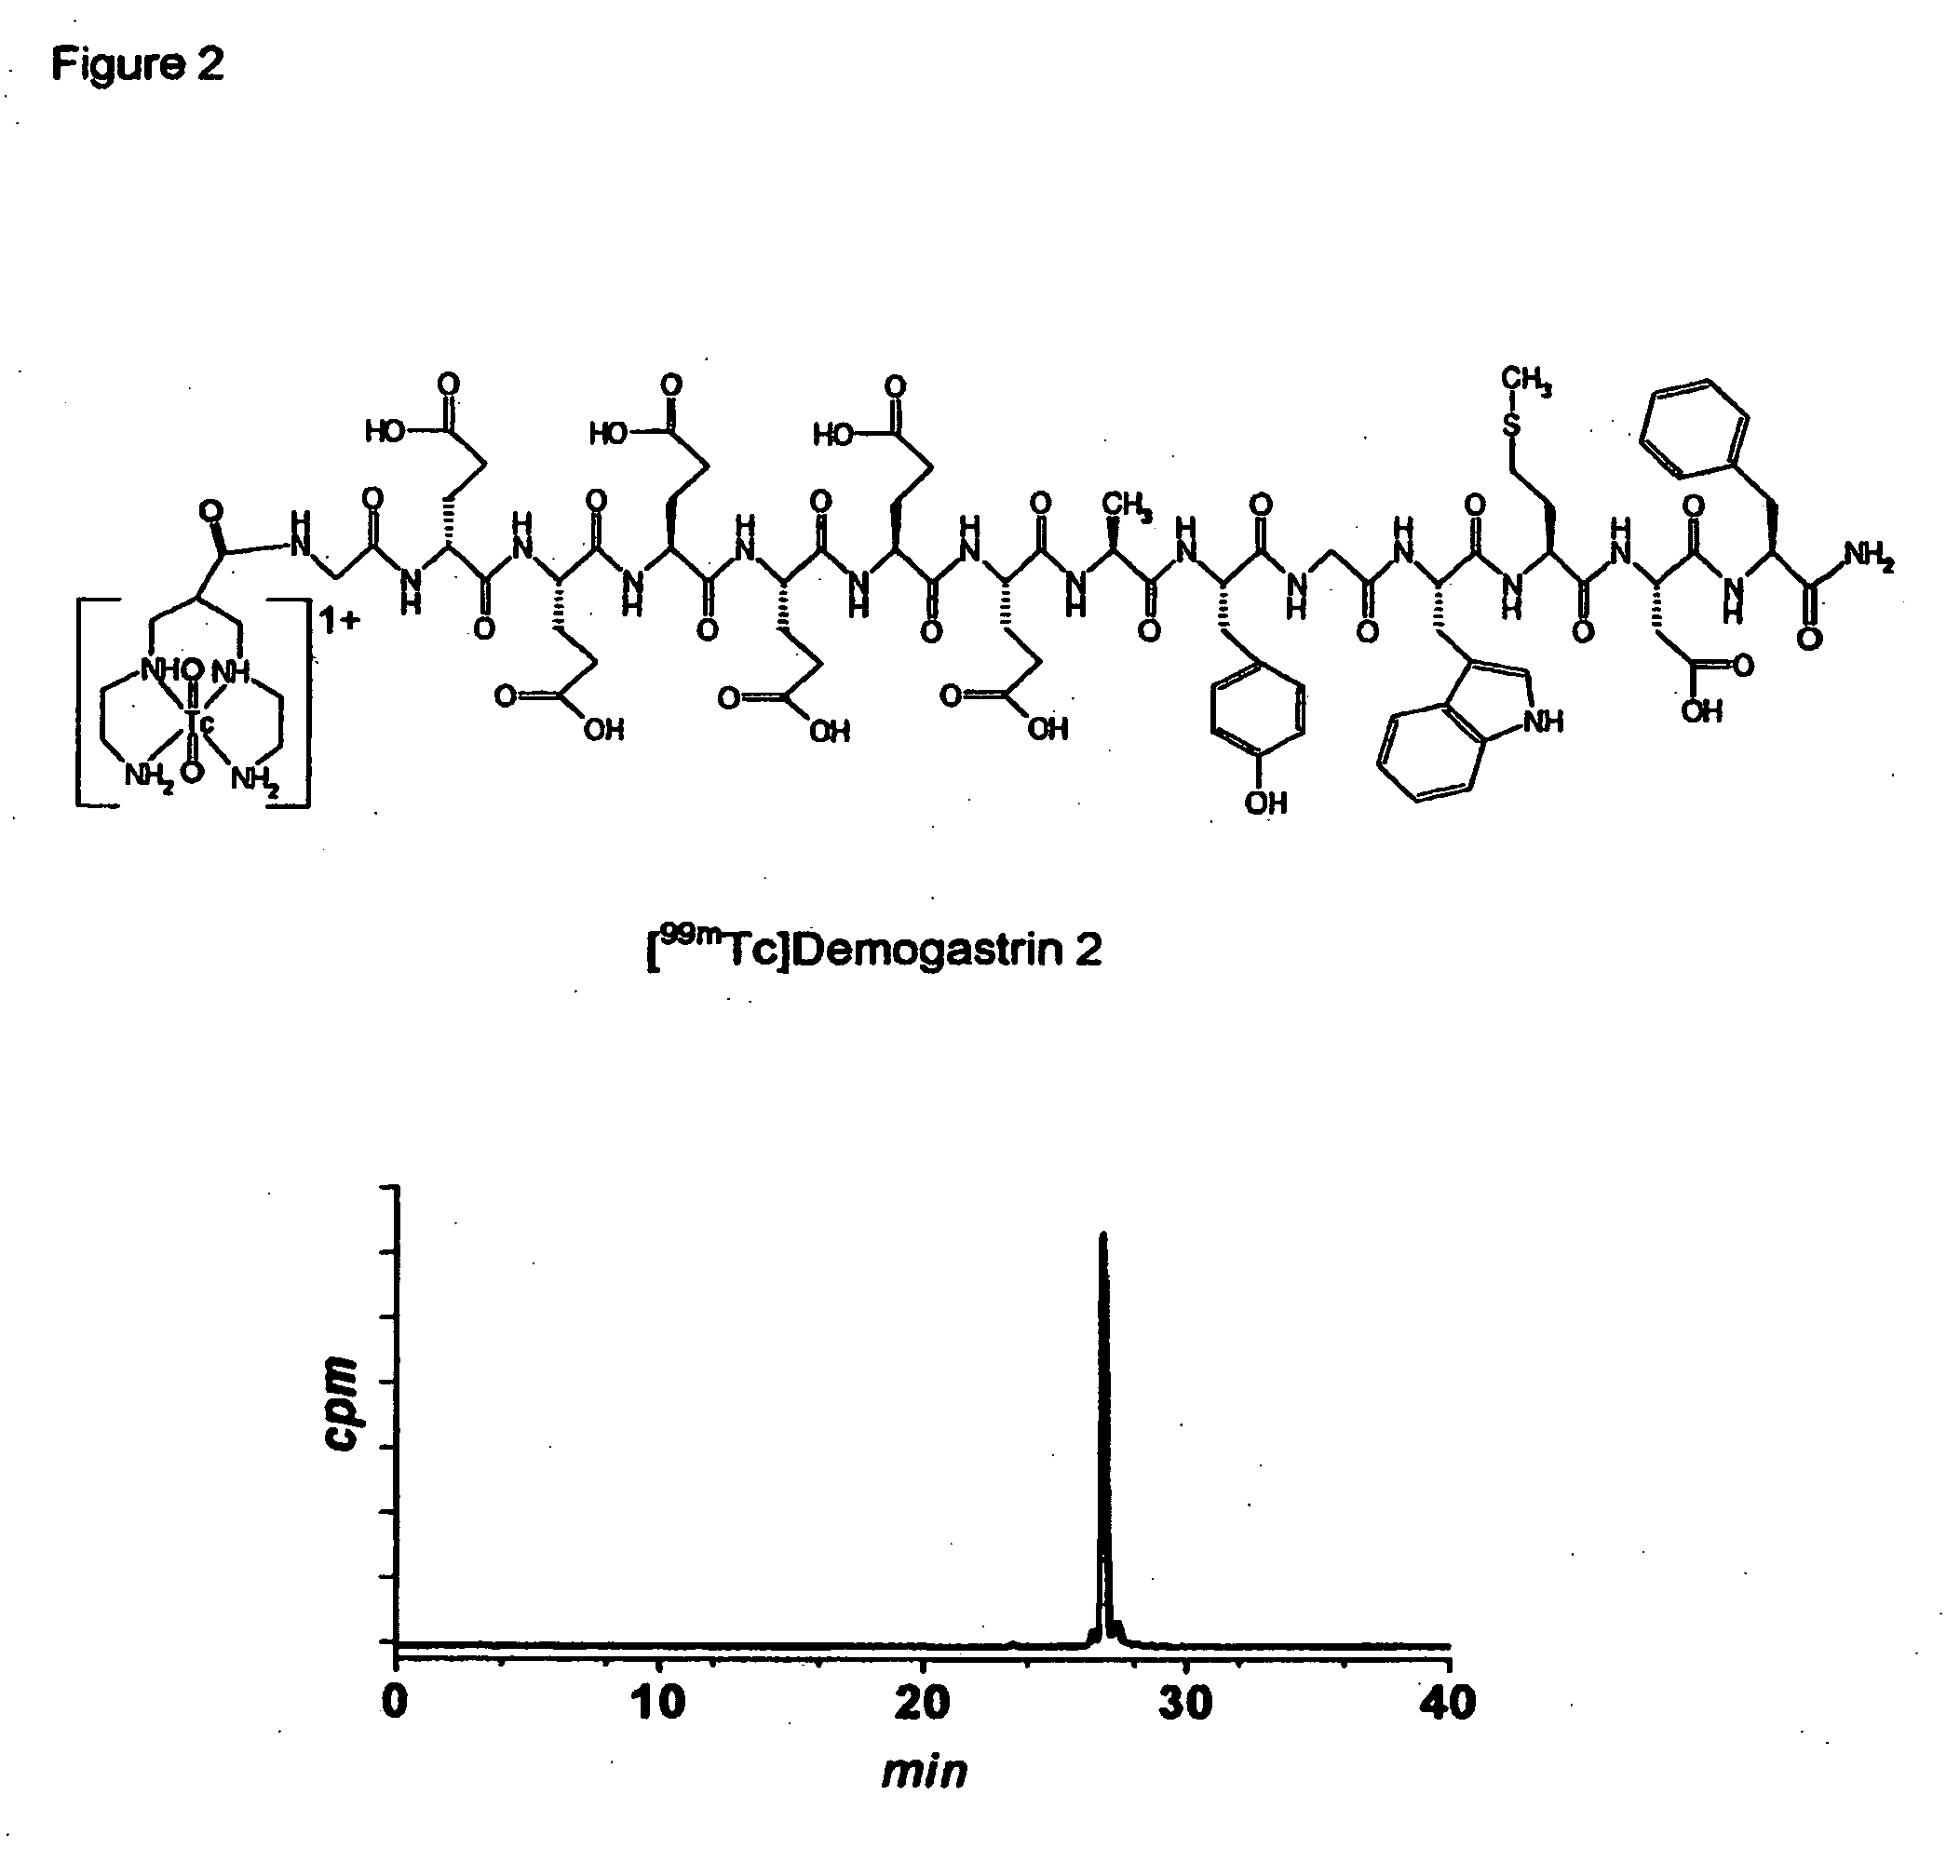 Modified minigastrin analogs for oncology applications